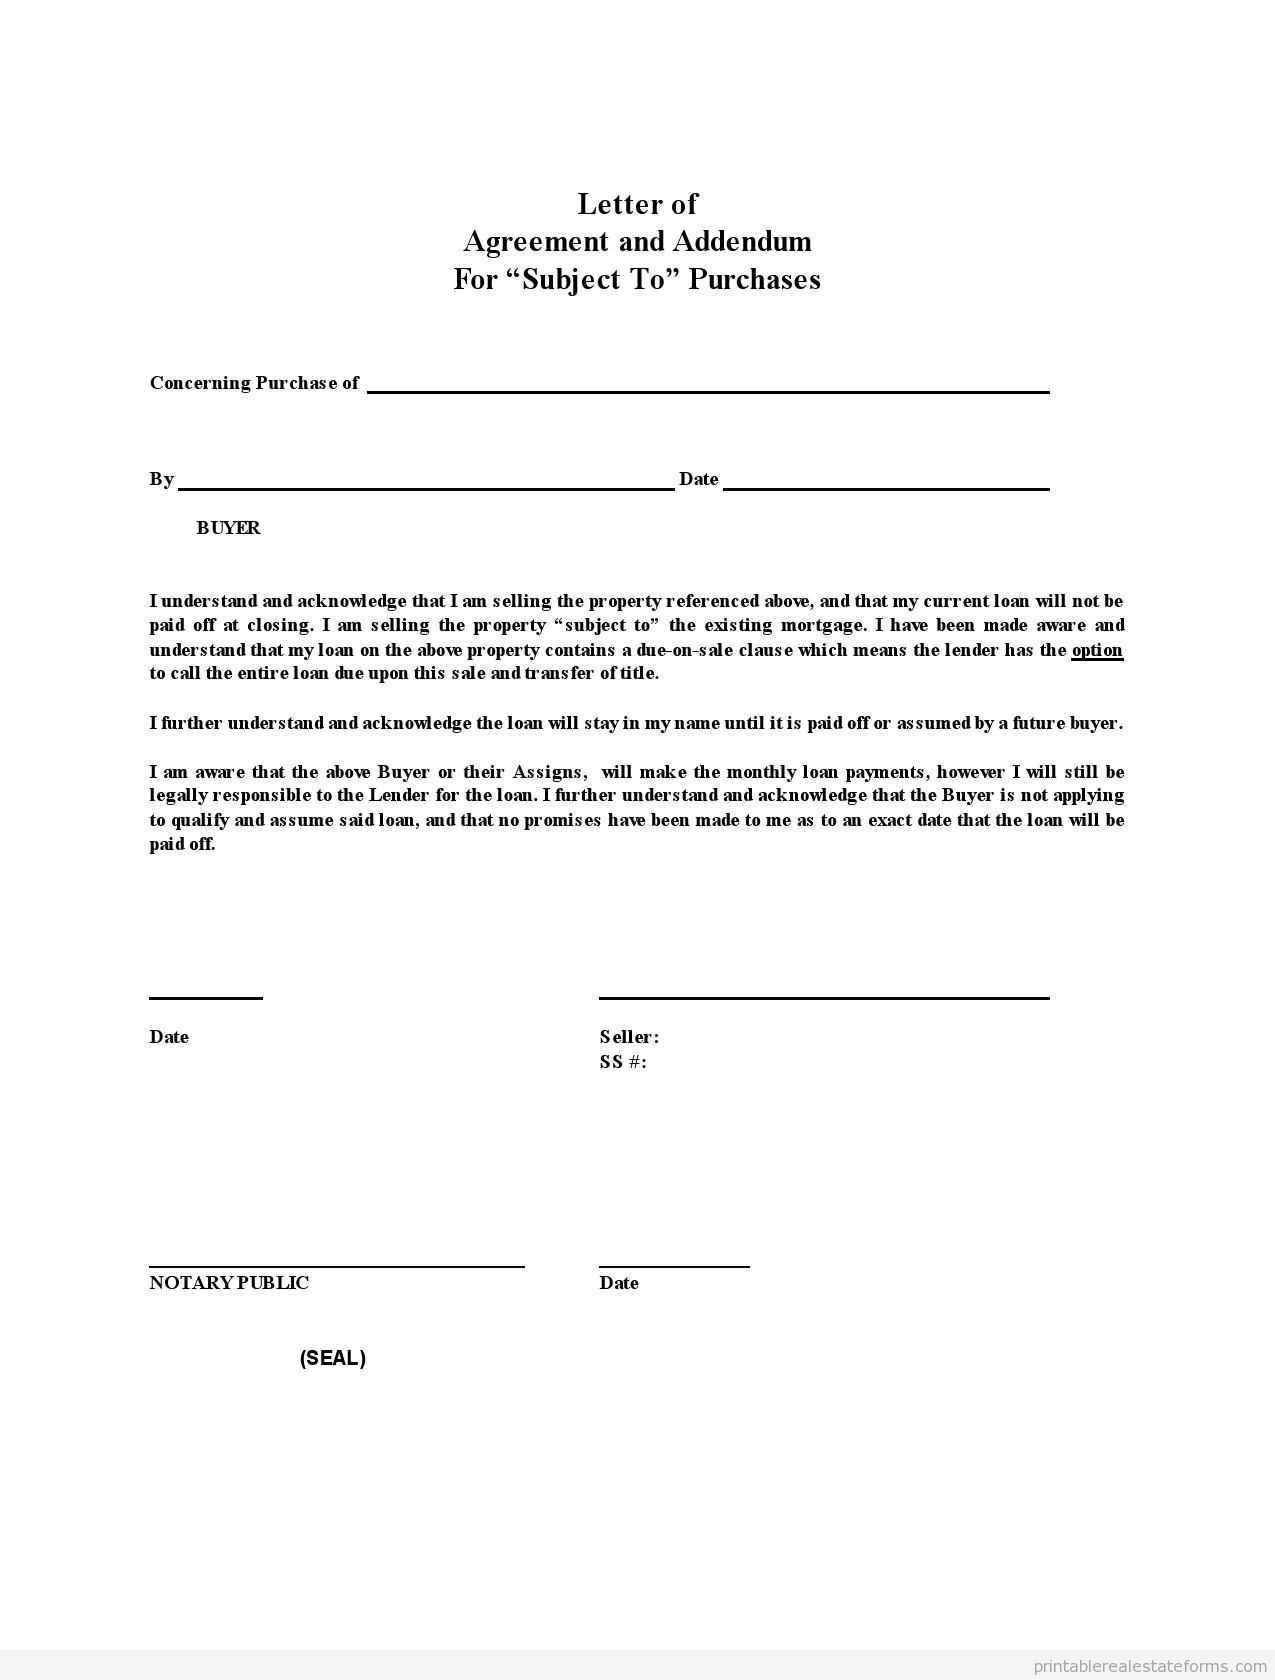 Printable Sample St Letter Of Agreement   Buy Form | Simple With Blank Legal Document Template